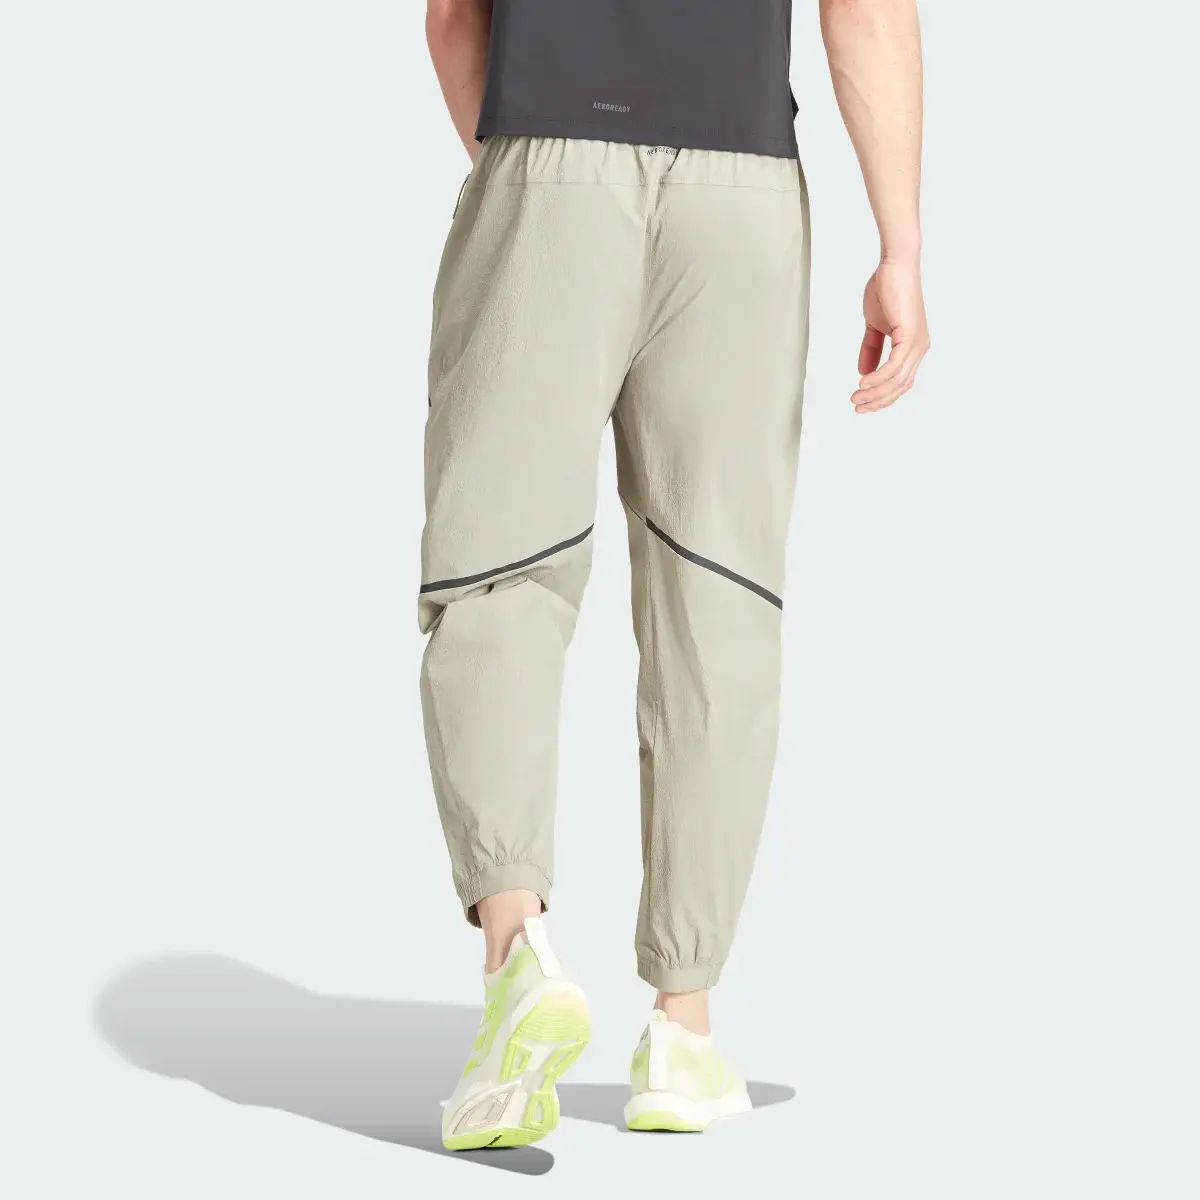 Adidas Designed for Training Workout Joggers. 3